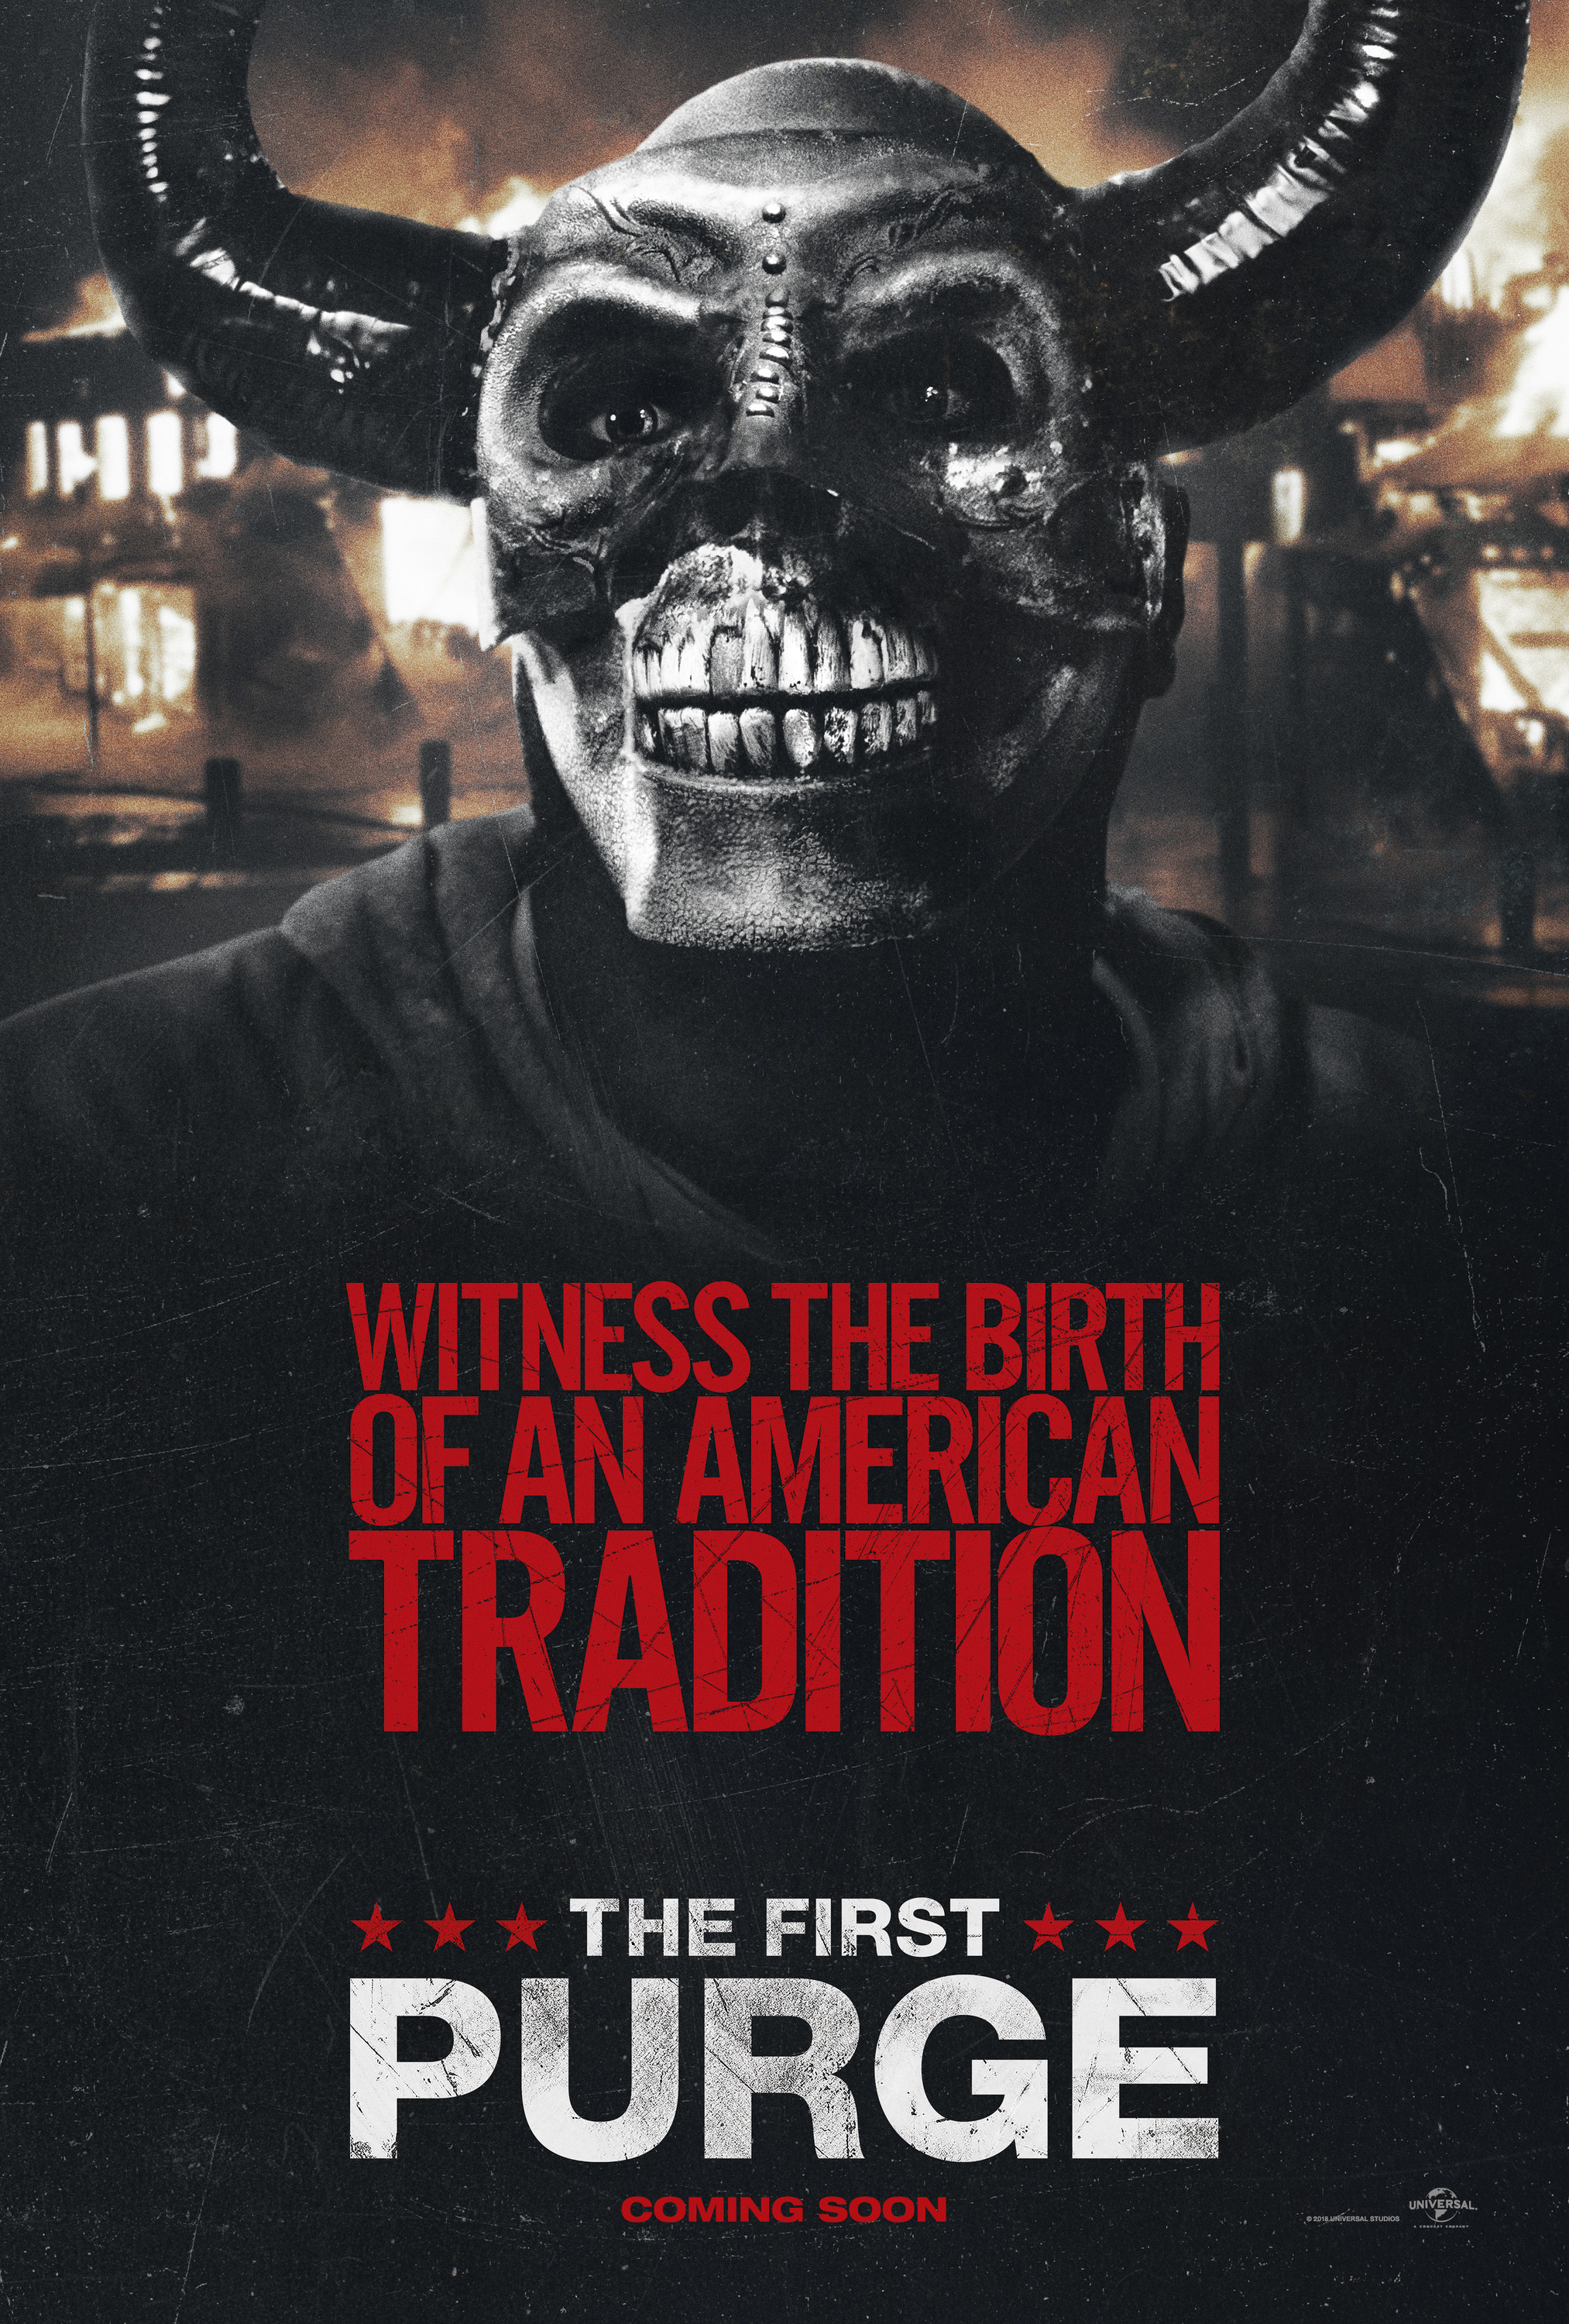 Mega Sized Movie Poster Image for The First Purge (#4 of 12)